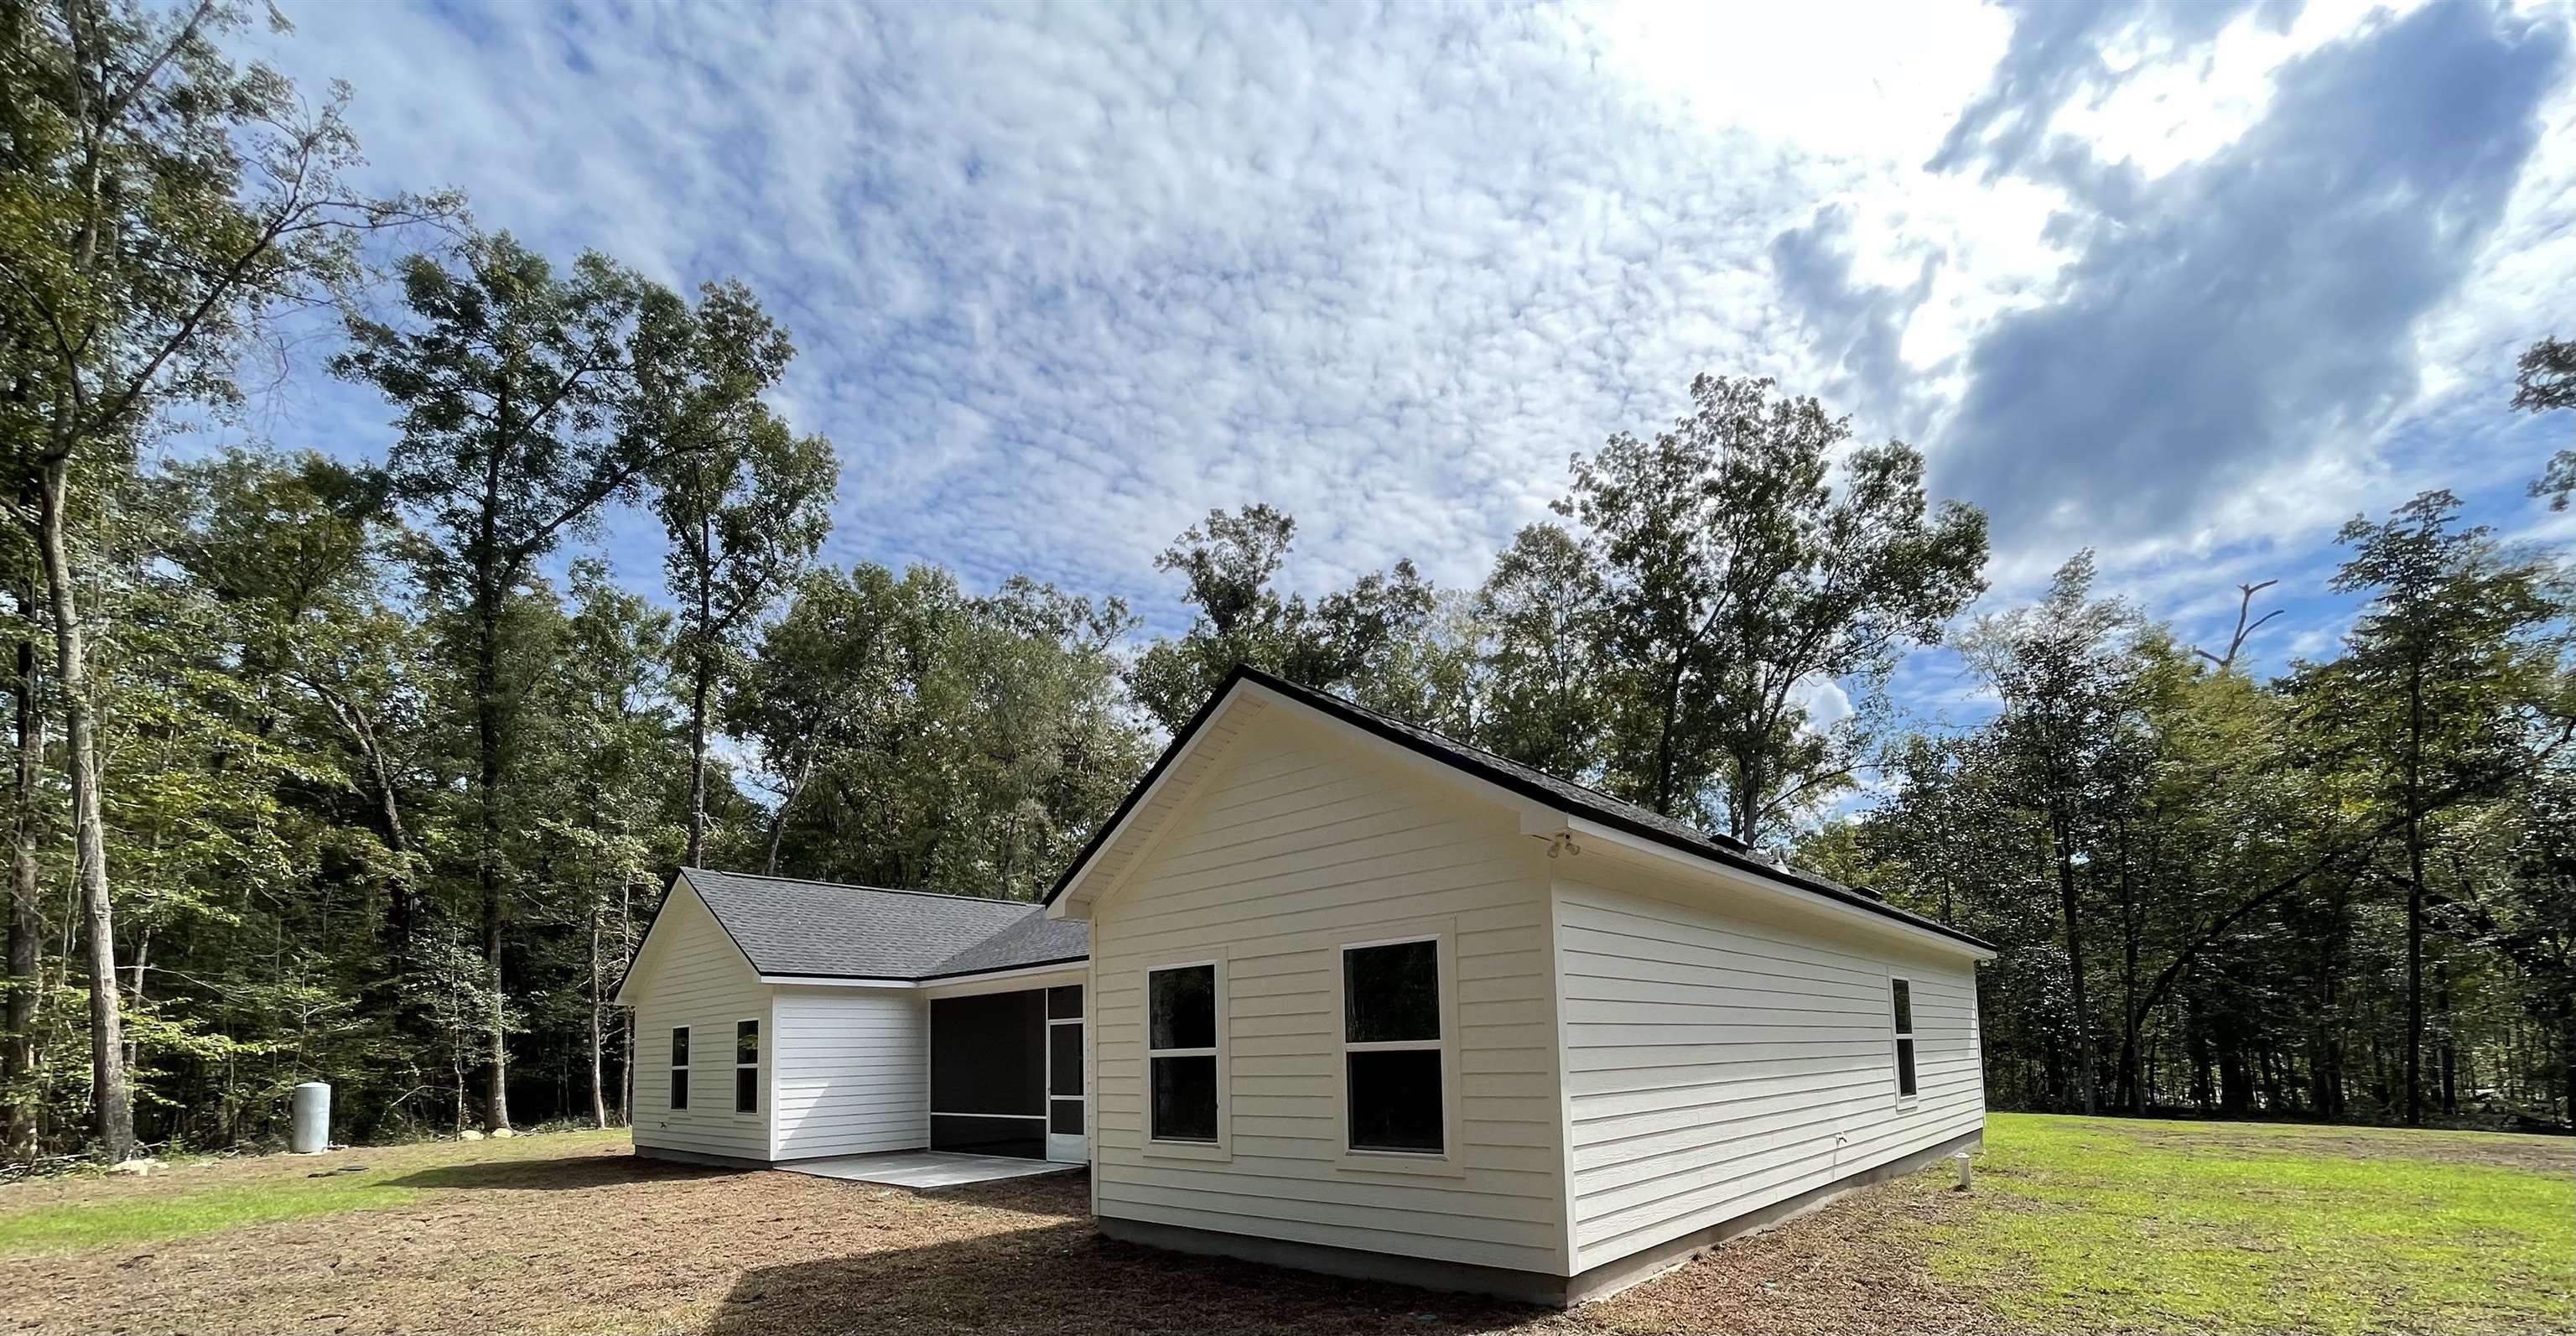 120 Strattonwood Place,CRAWFORDVILLE,Florida 32327,4 Bedrooms Bedrooms,3 BathroomsBathrooms,Detached single family,120 Strattonwood Place,369234